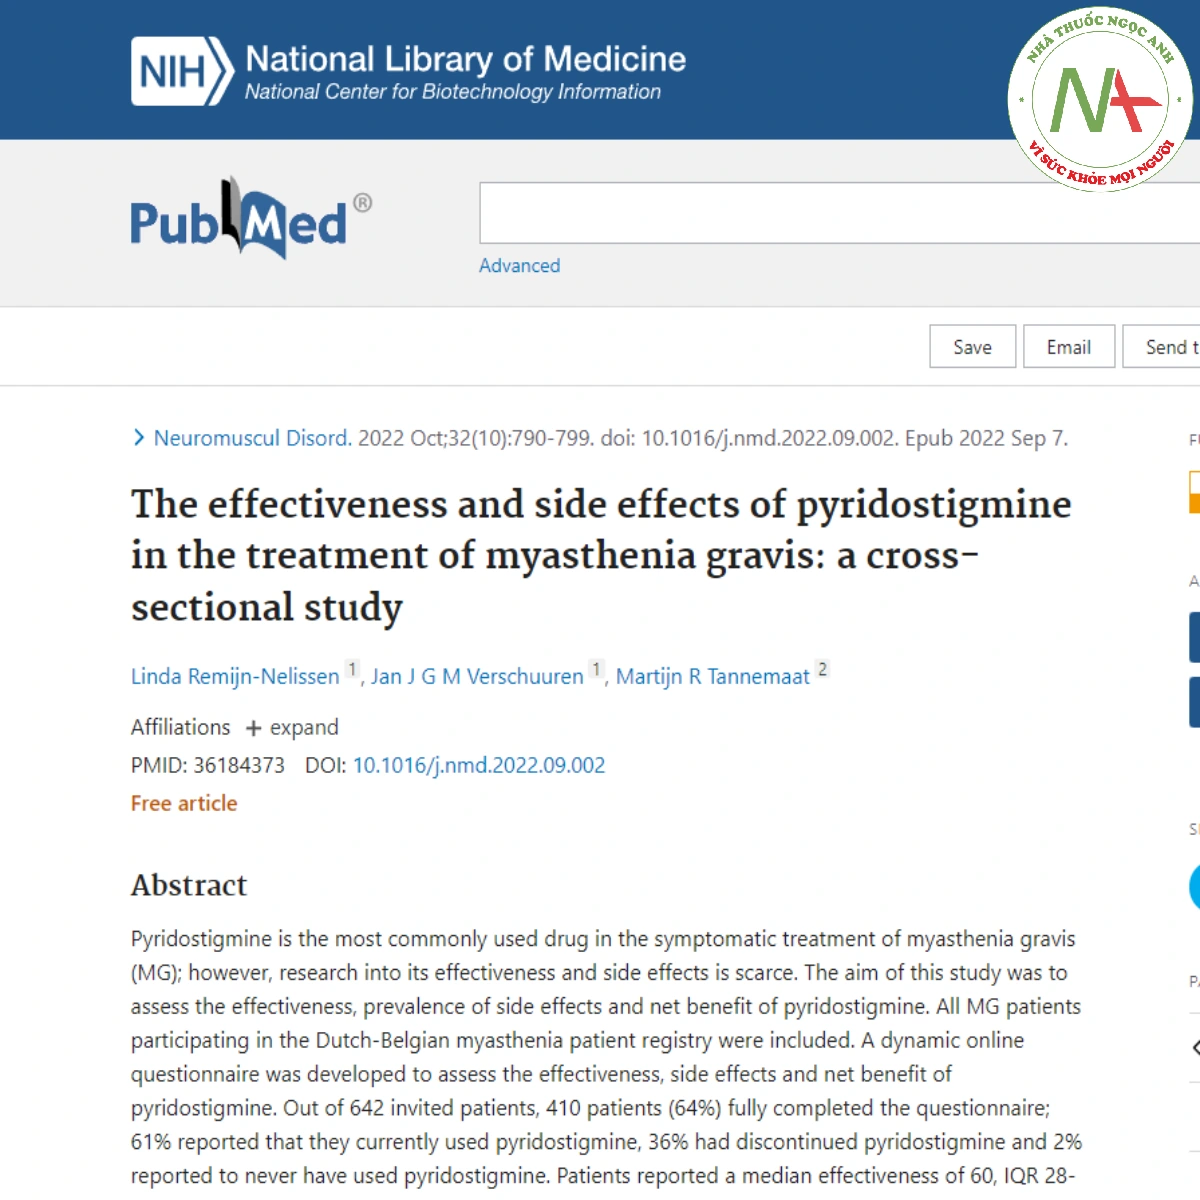 The effectiveness and side effects of pyridostigmine in the treatment of myasthenia gravis: a cross-sectional study